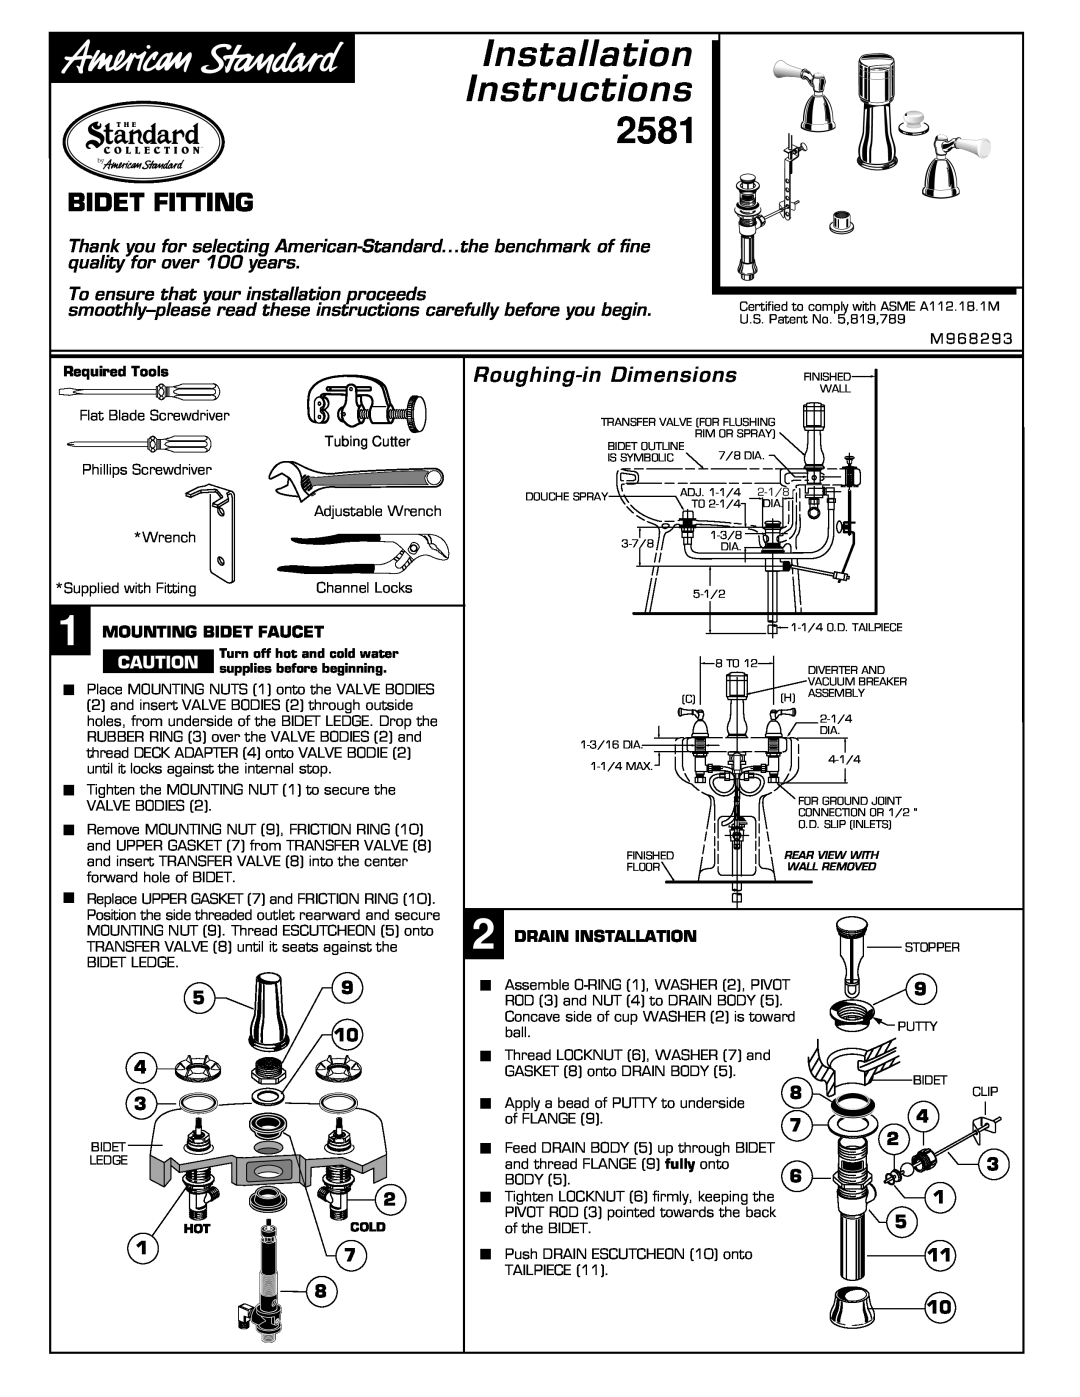 American Standard 2580 2581, 4 3 1, Installation Instructions, Bidet Fitting, Roughing-inDimensions 